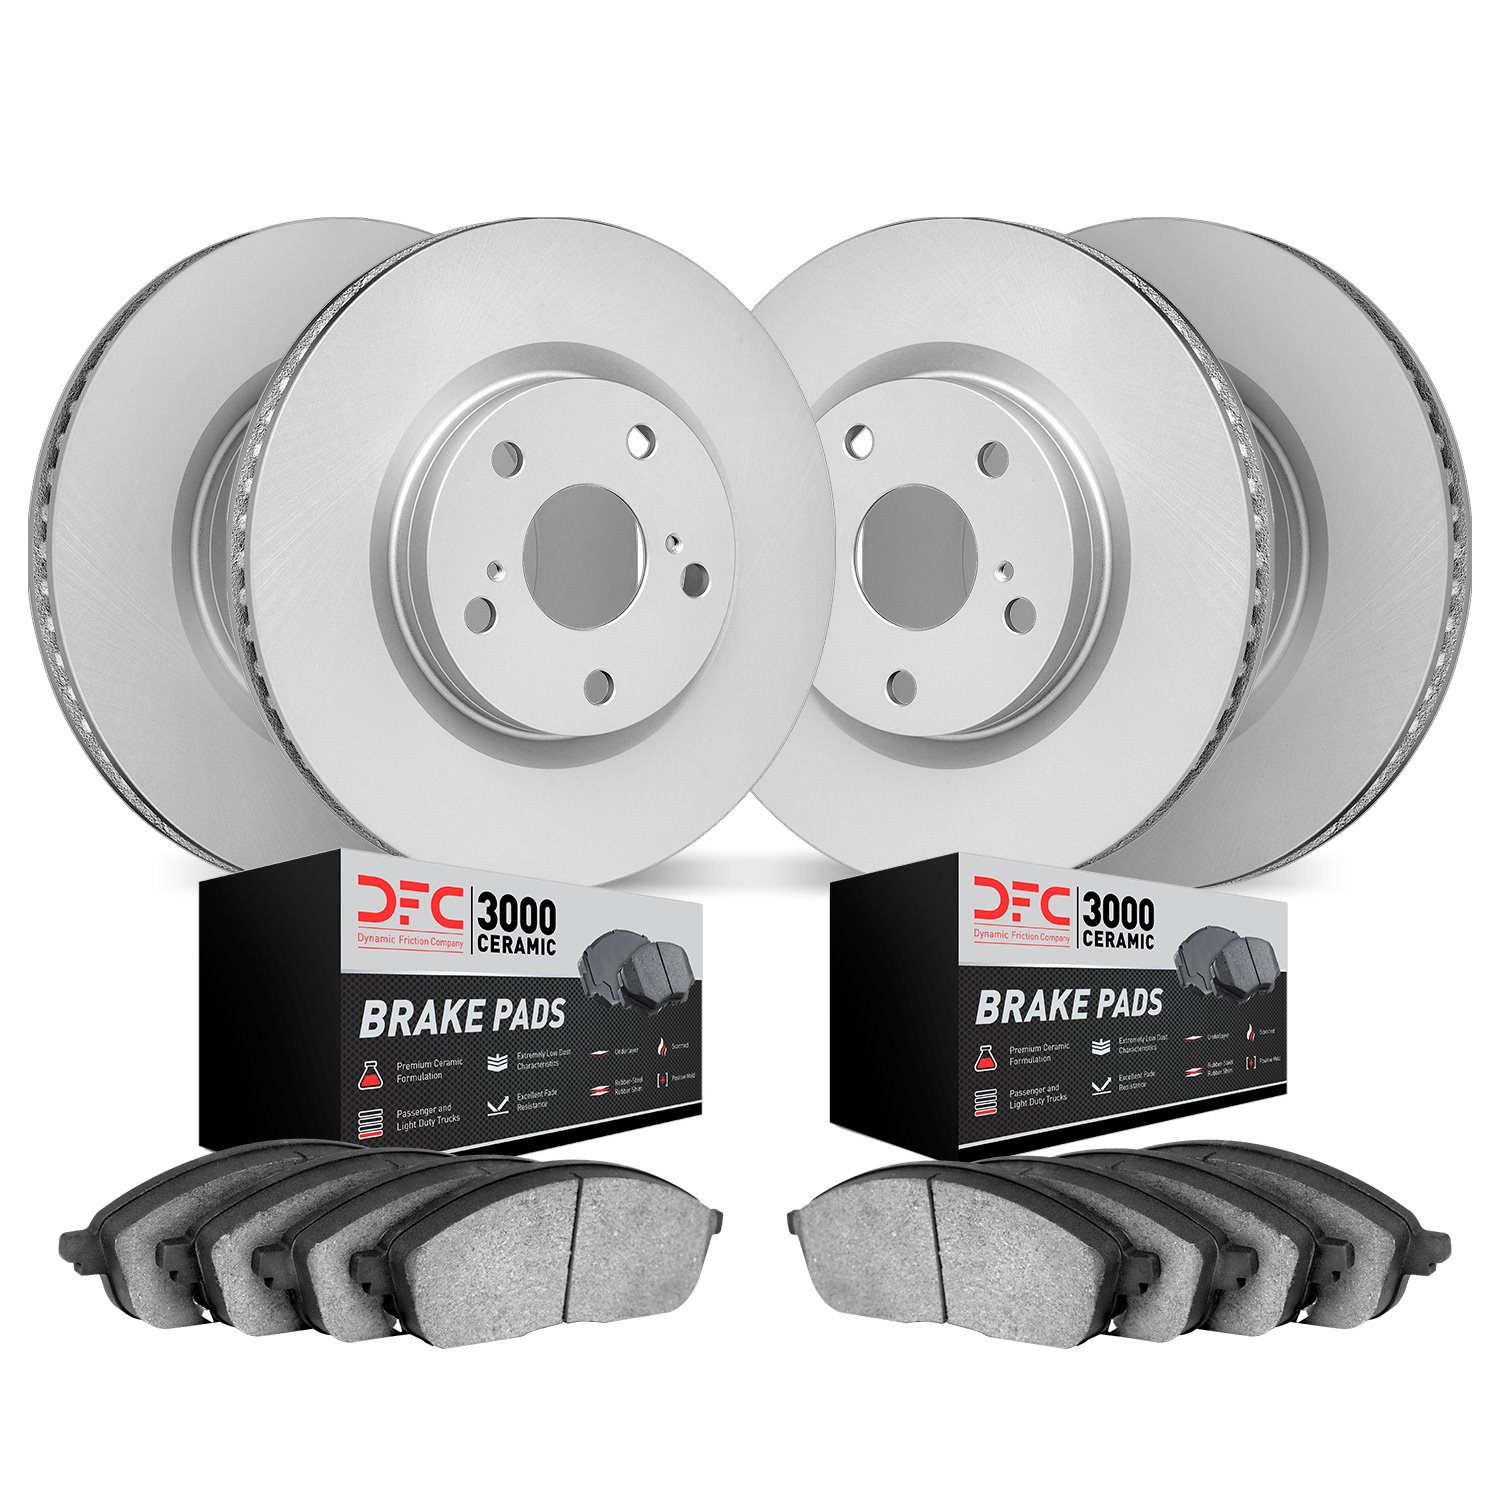 4304-39019 Geospec Brake Rotors with 3000-Series Ceramic Brake Pads Kit, Fits Select Mopar, Position: Front and Rear